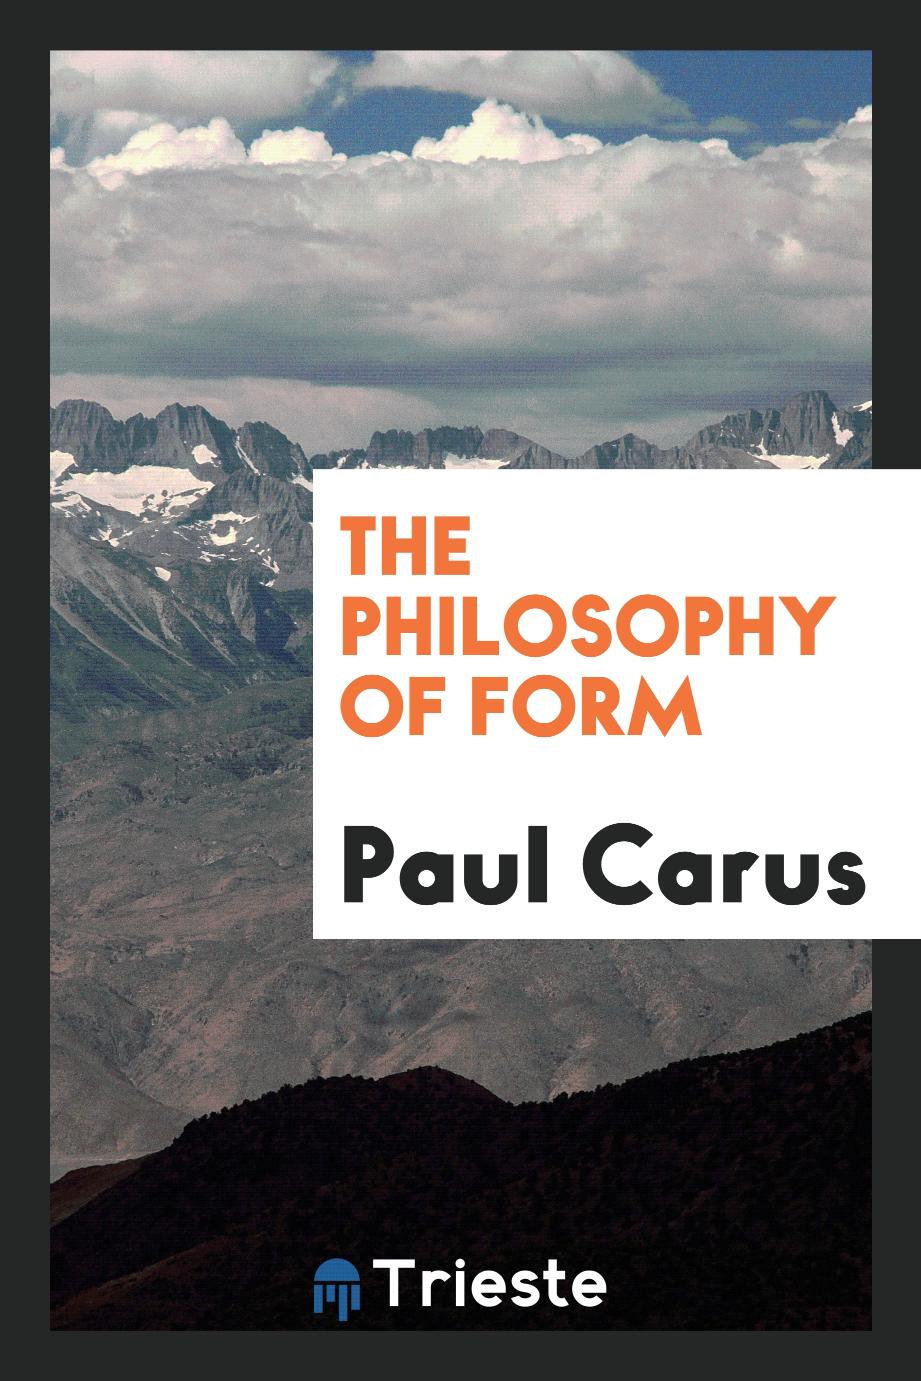 The philosophy of form